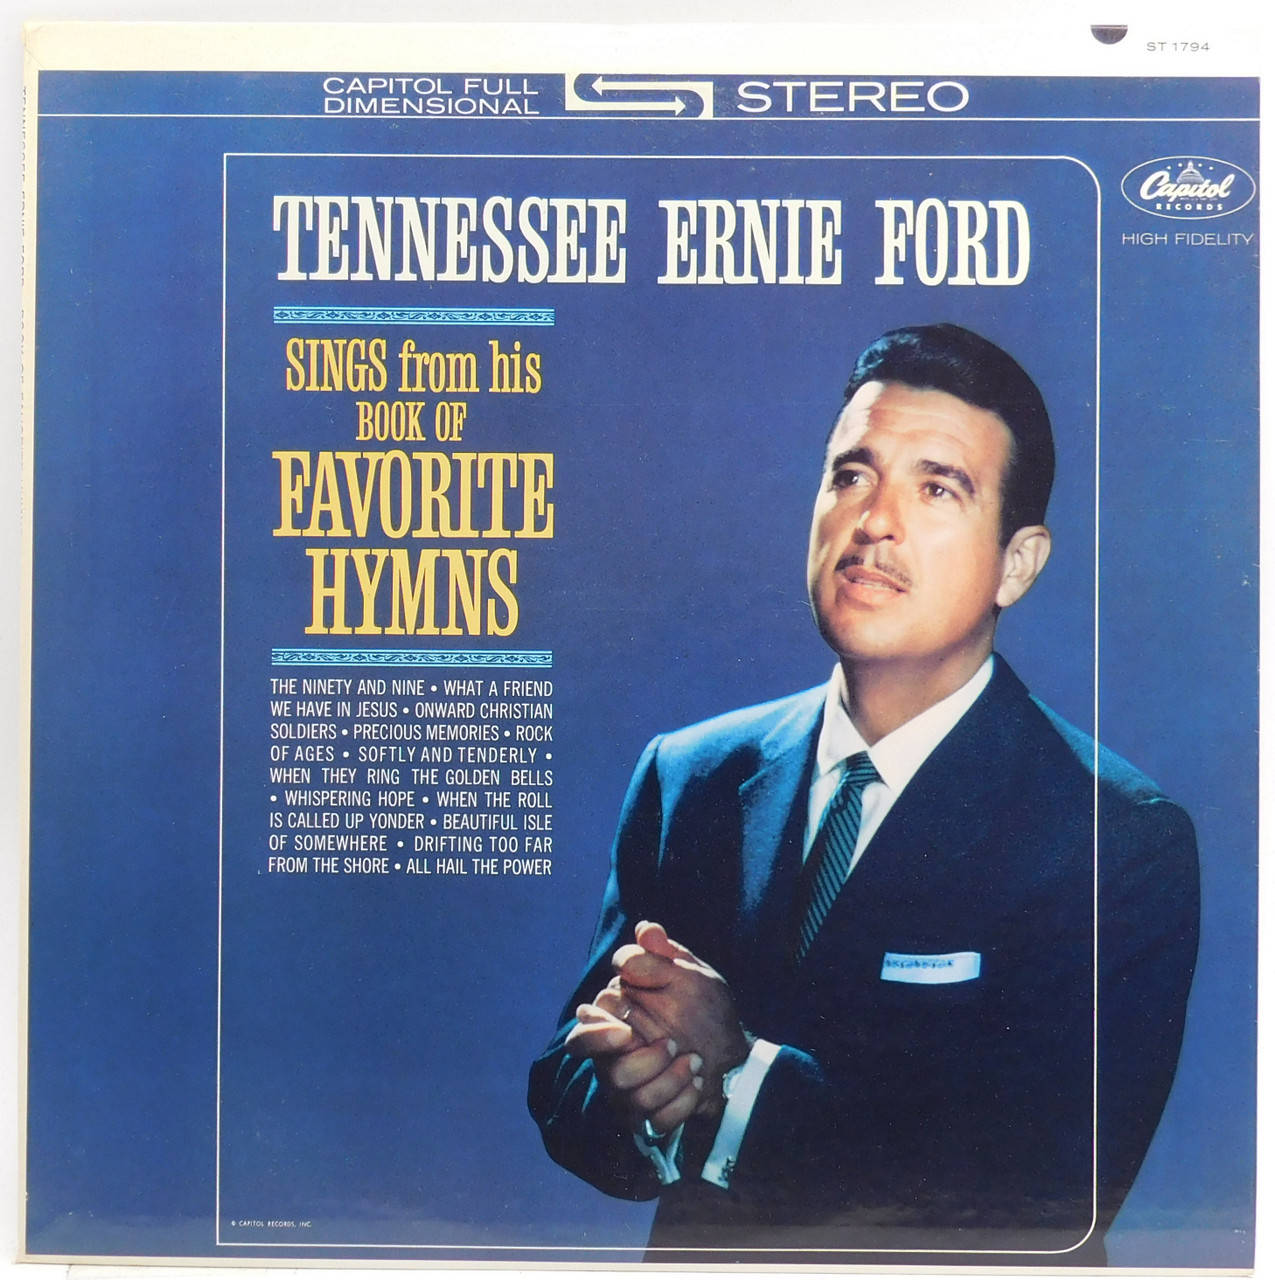 Tennessee Ernie Ford's Favorite Hymns on Vinyl Record Wallpaper